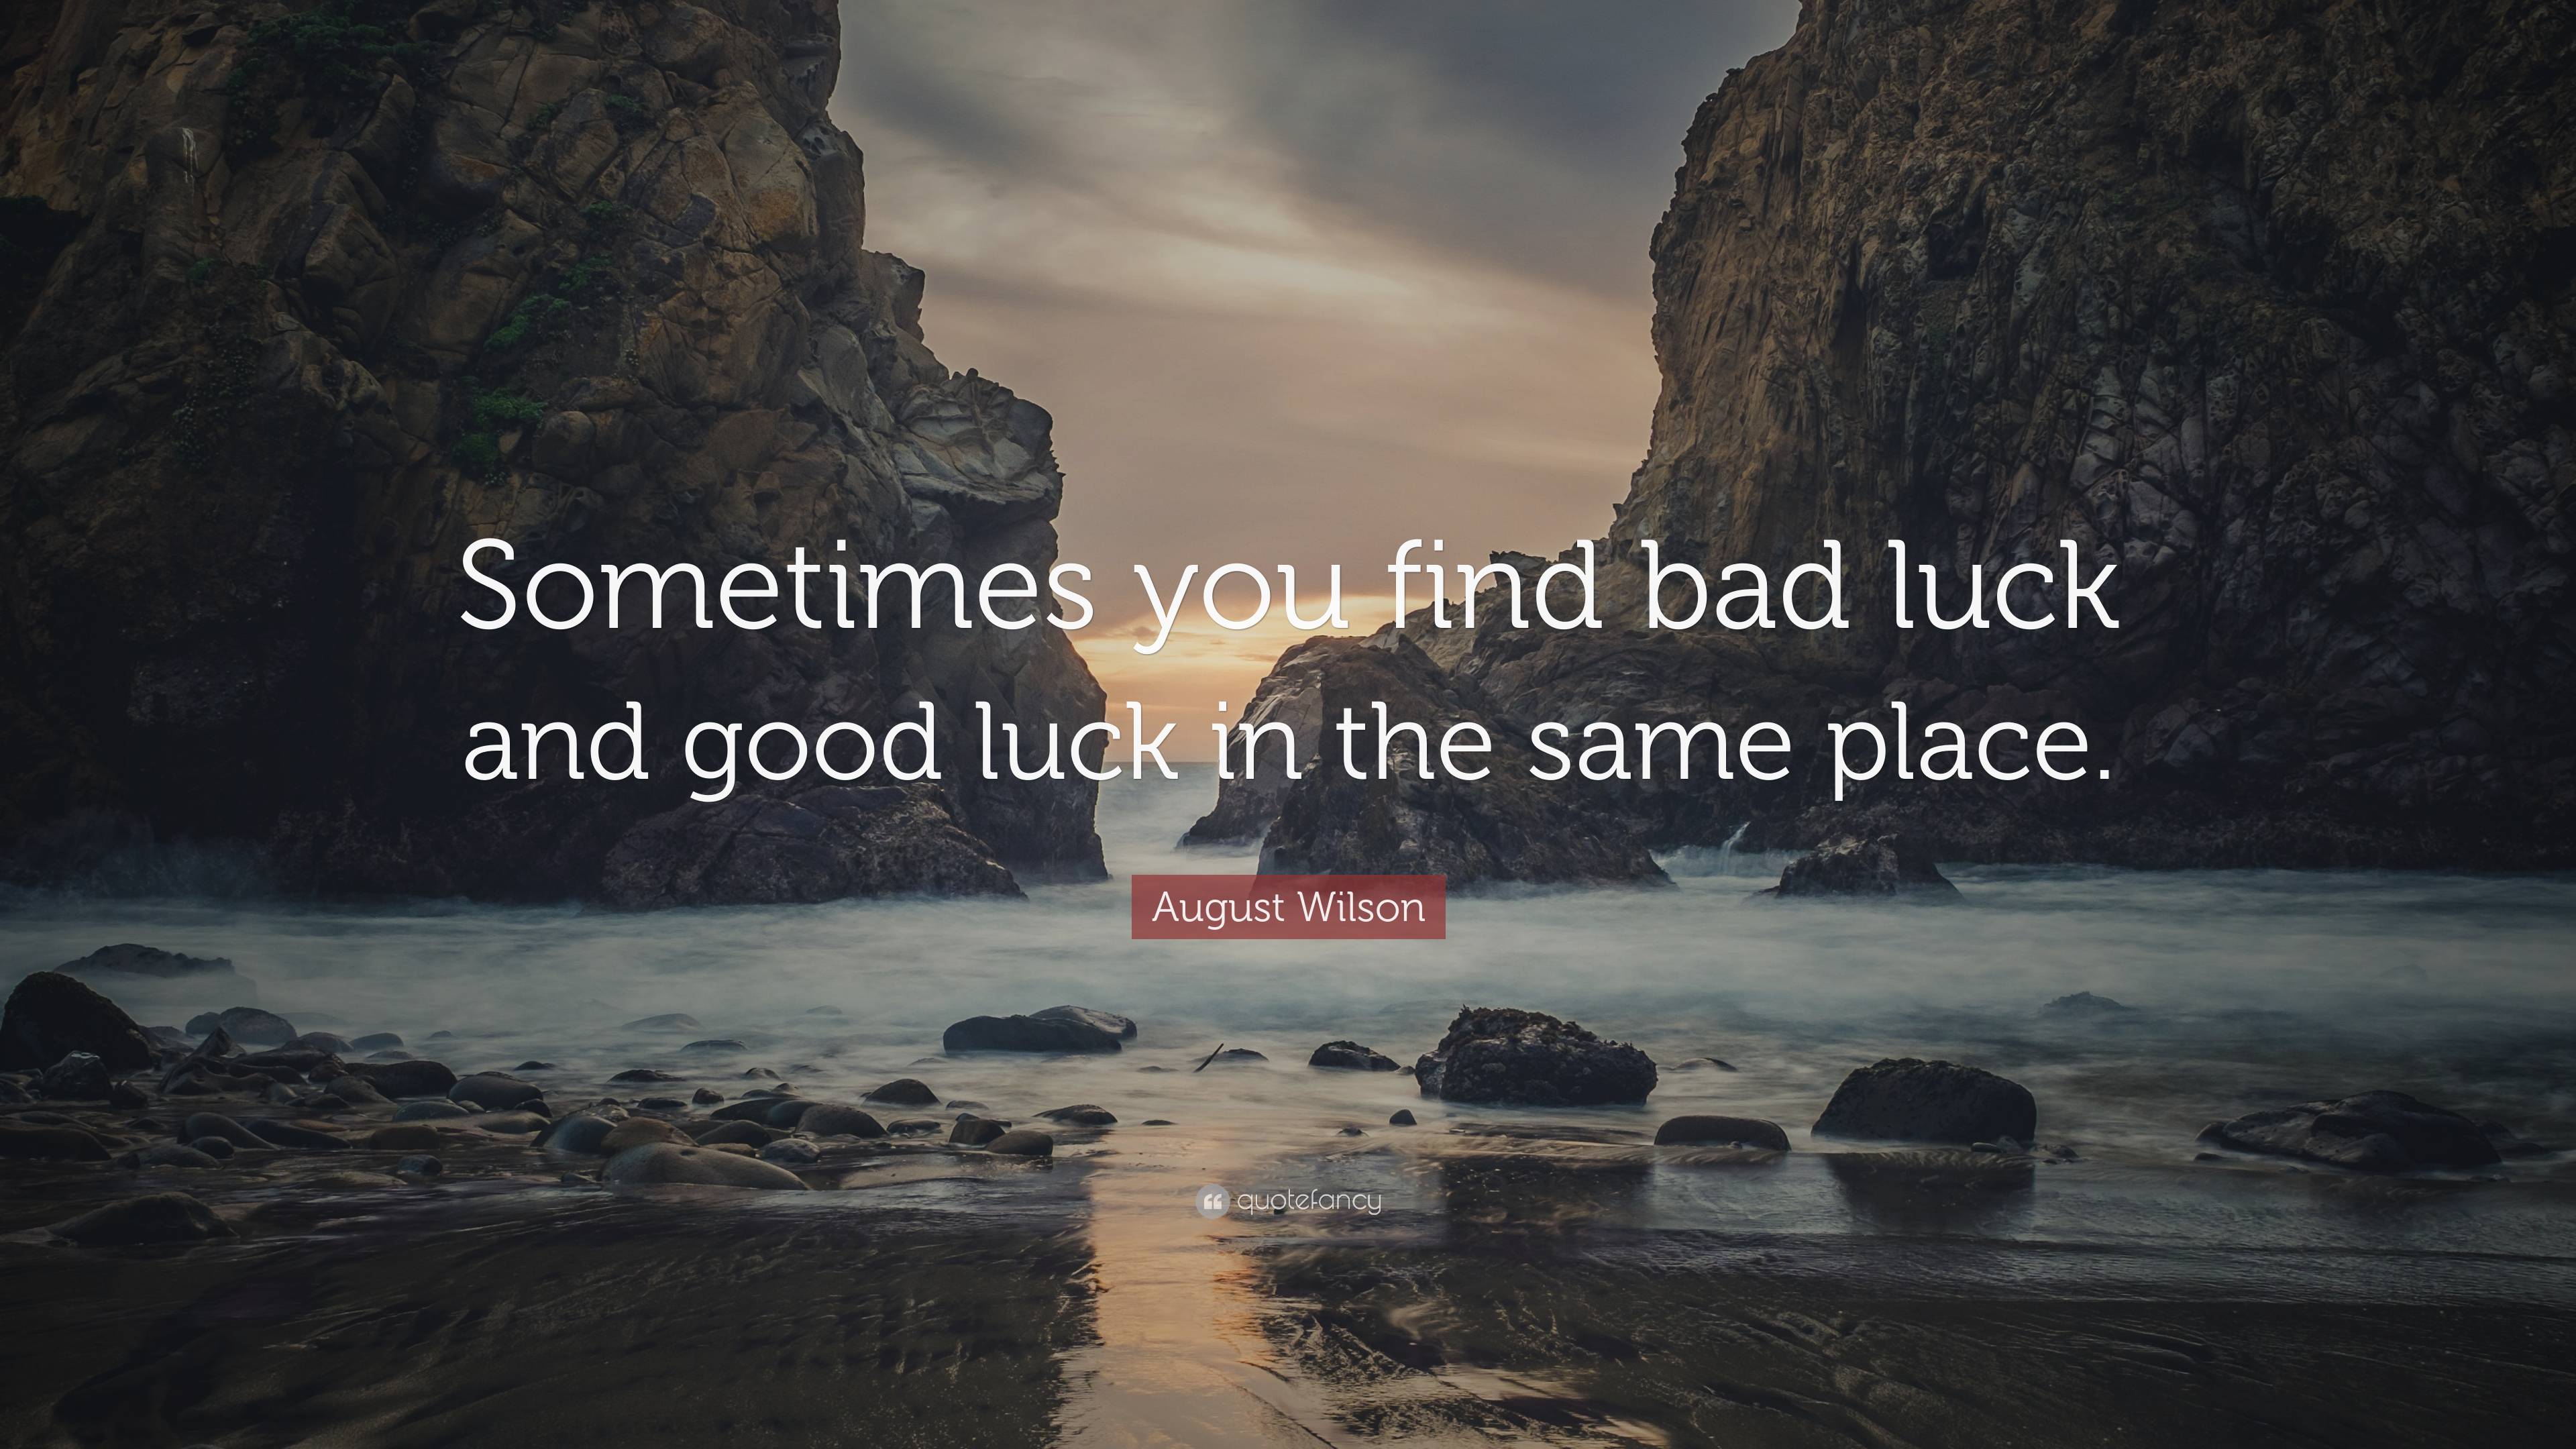 August Wilson Quote: “Sometimes you find bad luck and good luck in the same  place.”